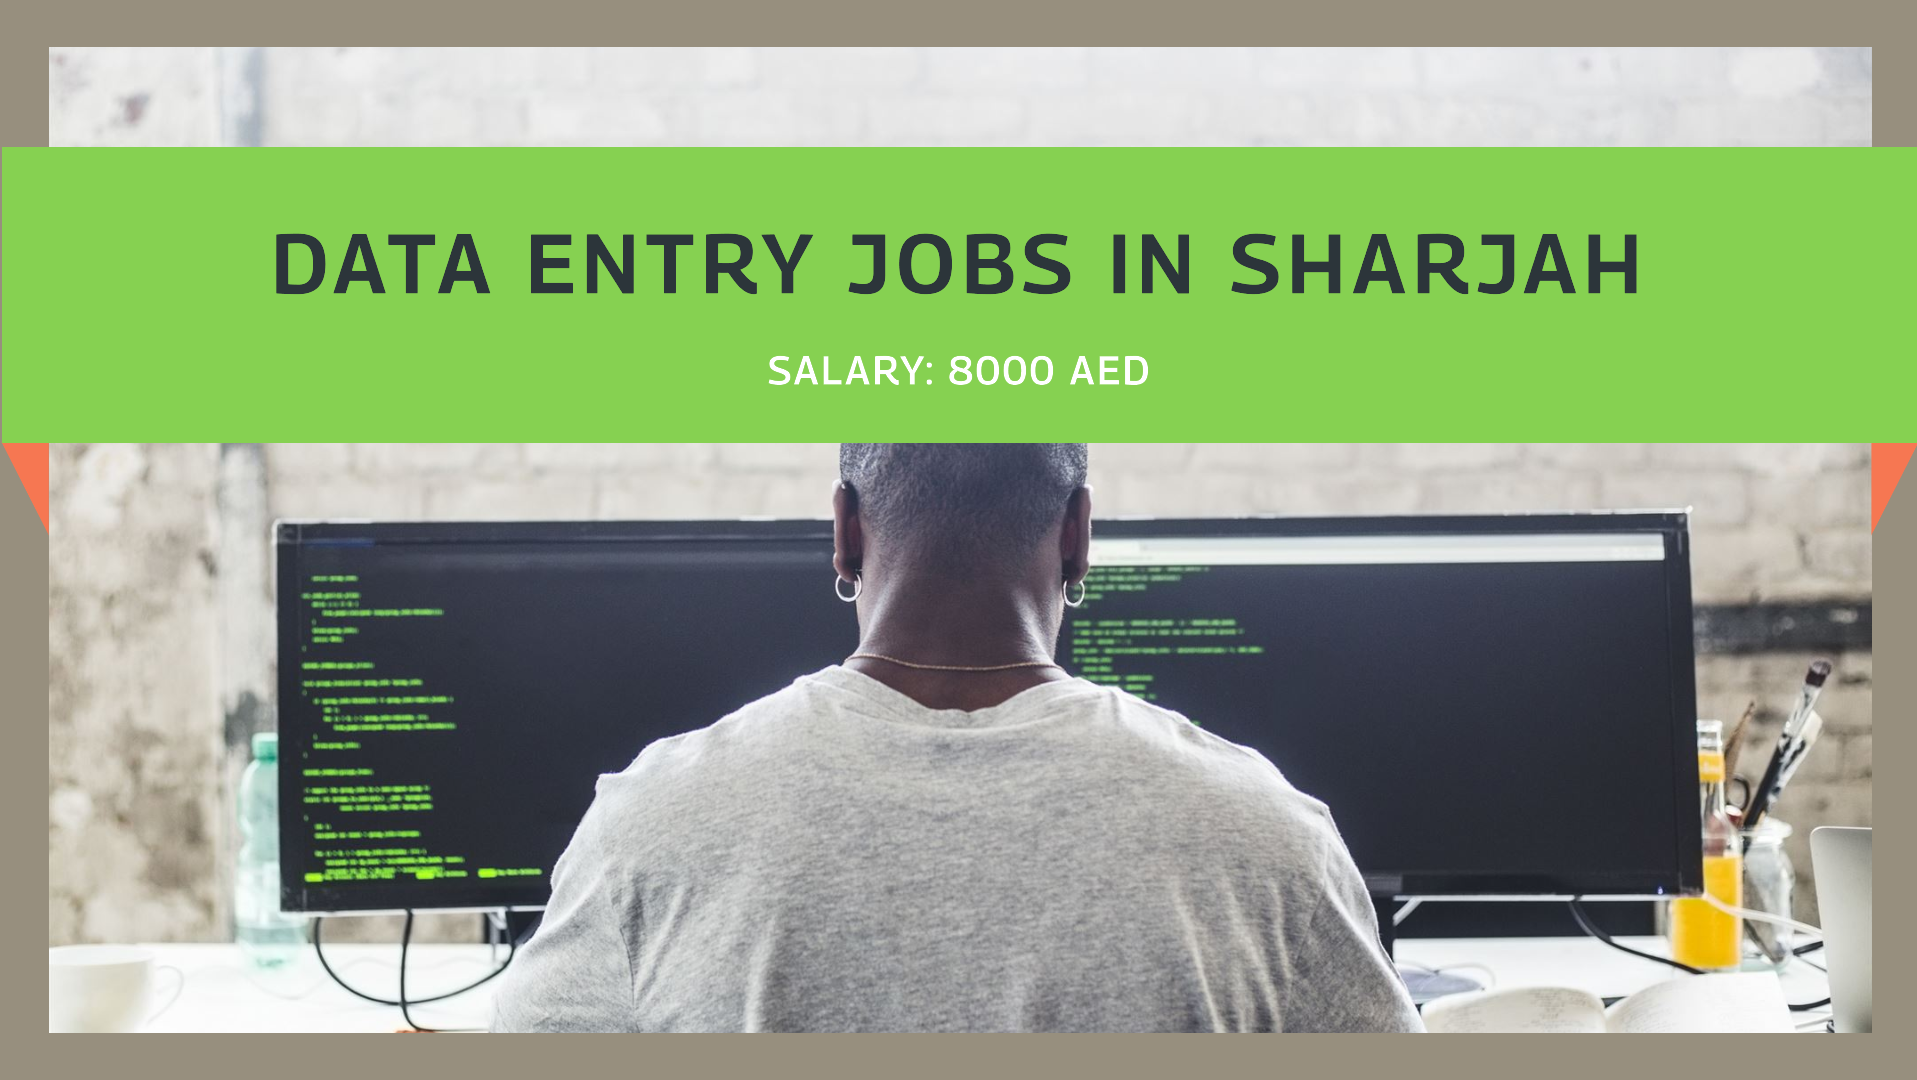 Data Entry jobs in Sharjah with salary 8000 AED